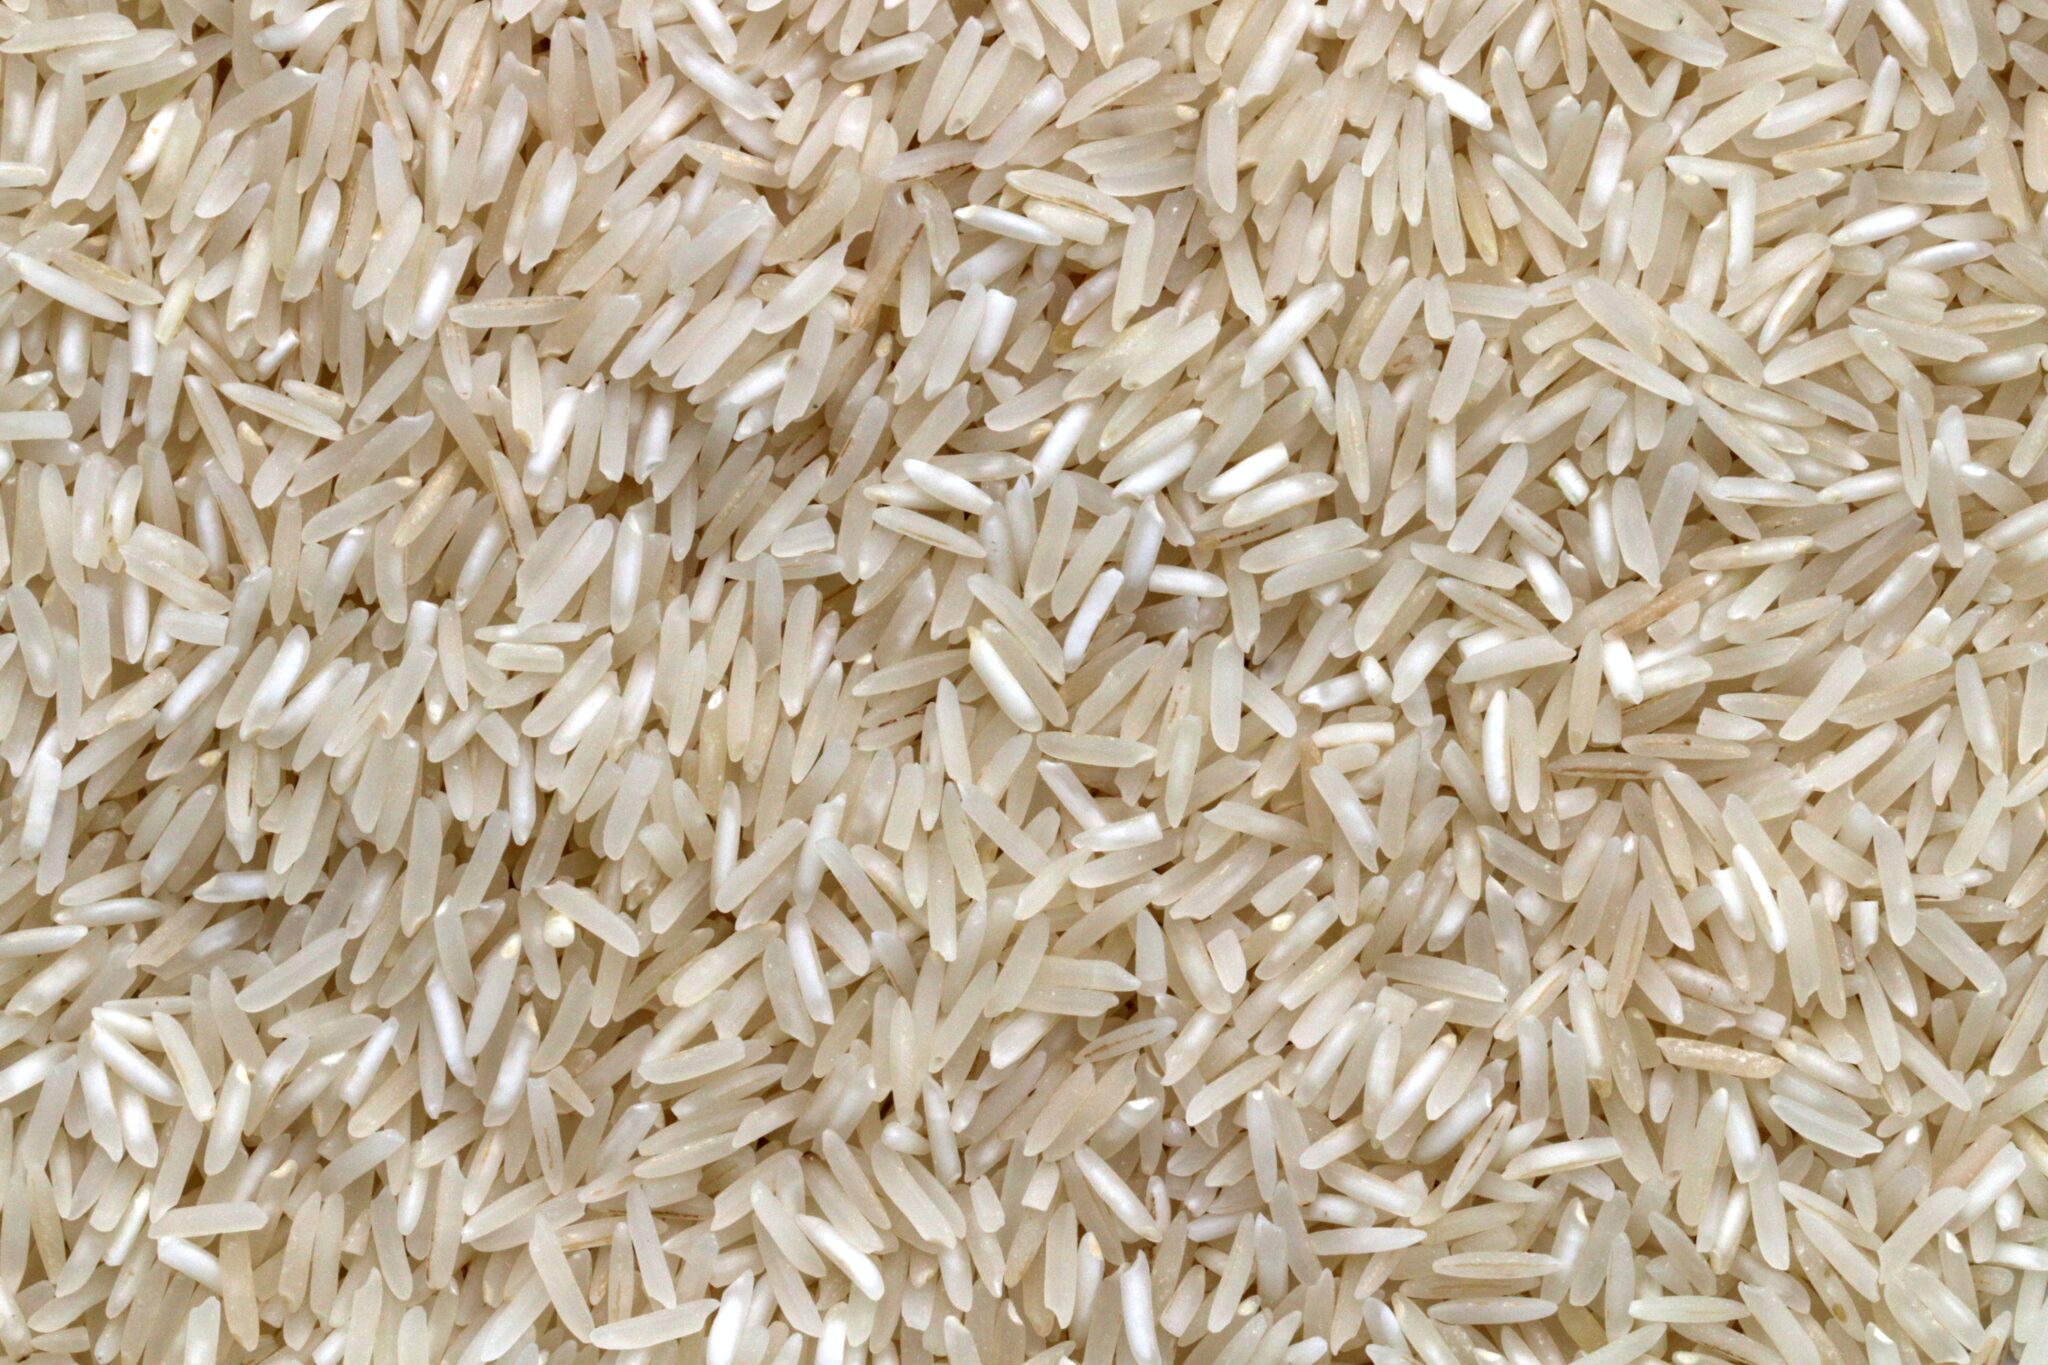 Grains of rice that is light brown in color and has a slightly translucent appearance. 